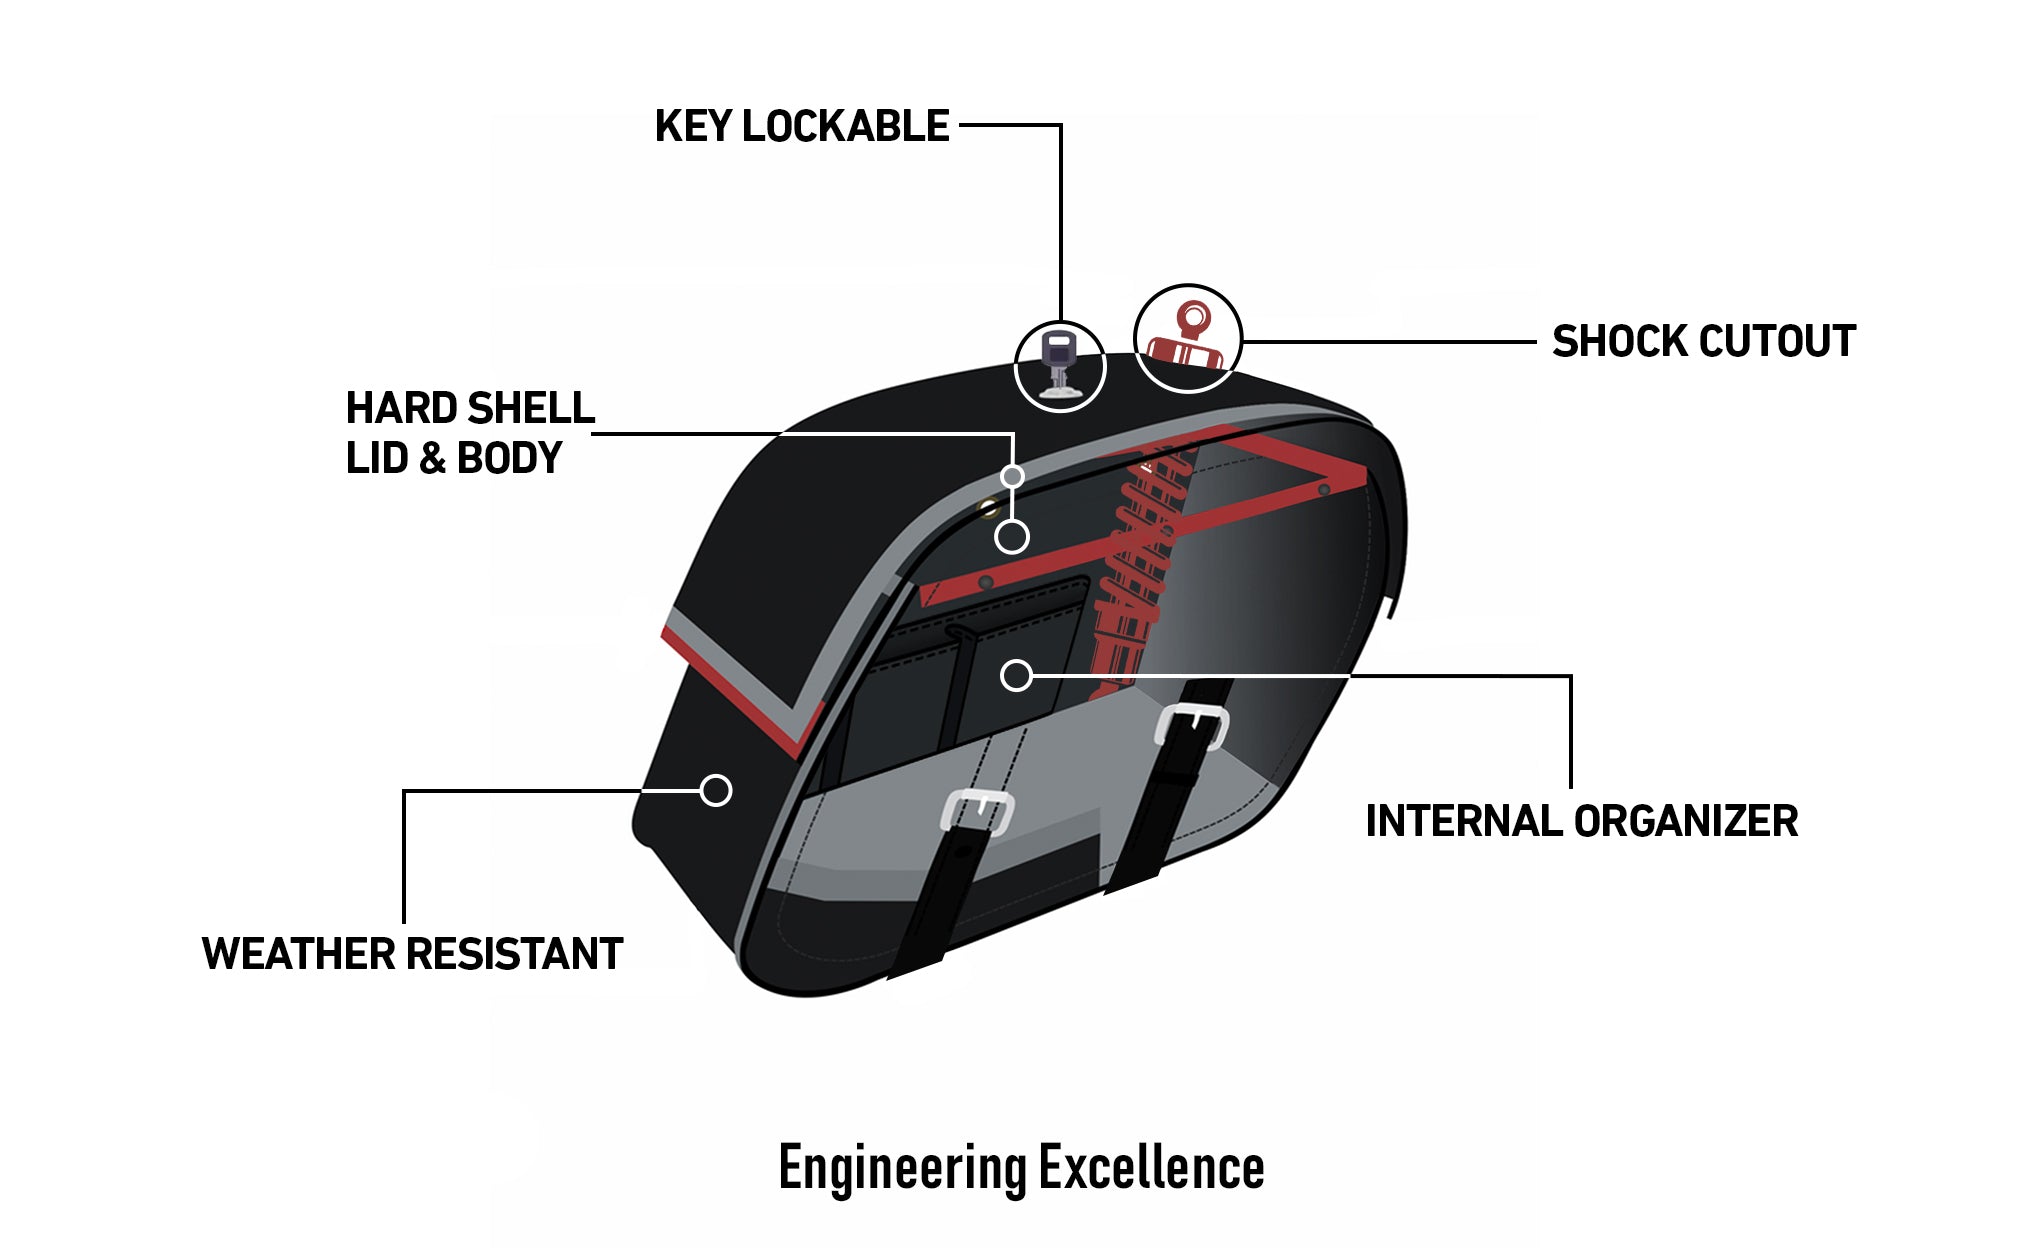 Viking Raven Extra Large Triumph Rocket Iii Classic Shock Cut Out Leather Motorcycle Saddlebags Engineering Excellence with Bag on Bike @expand